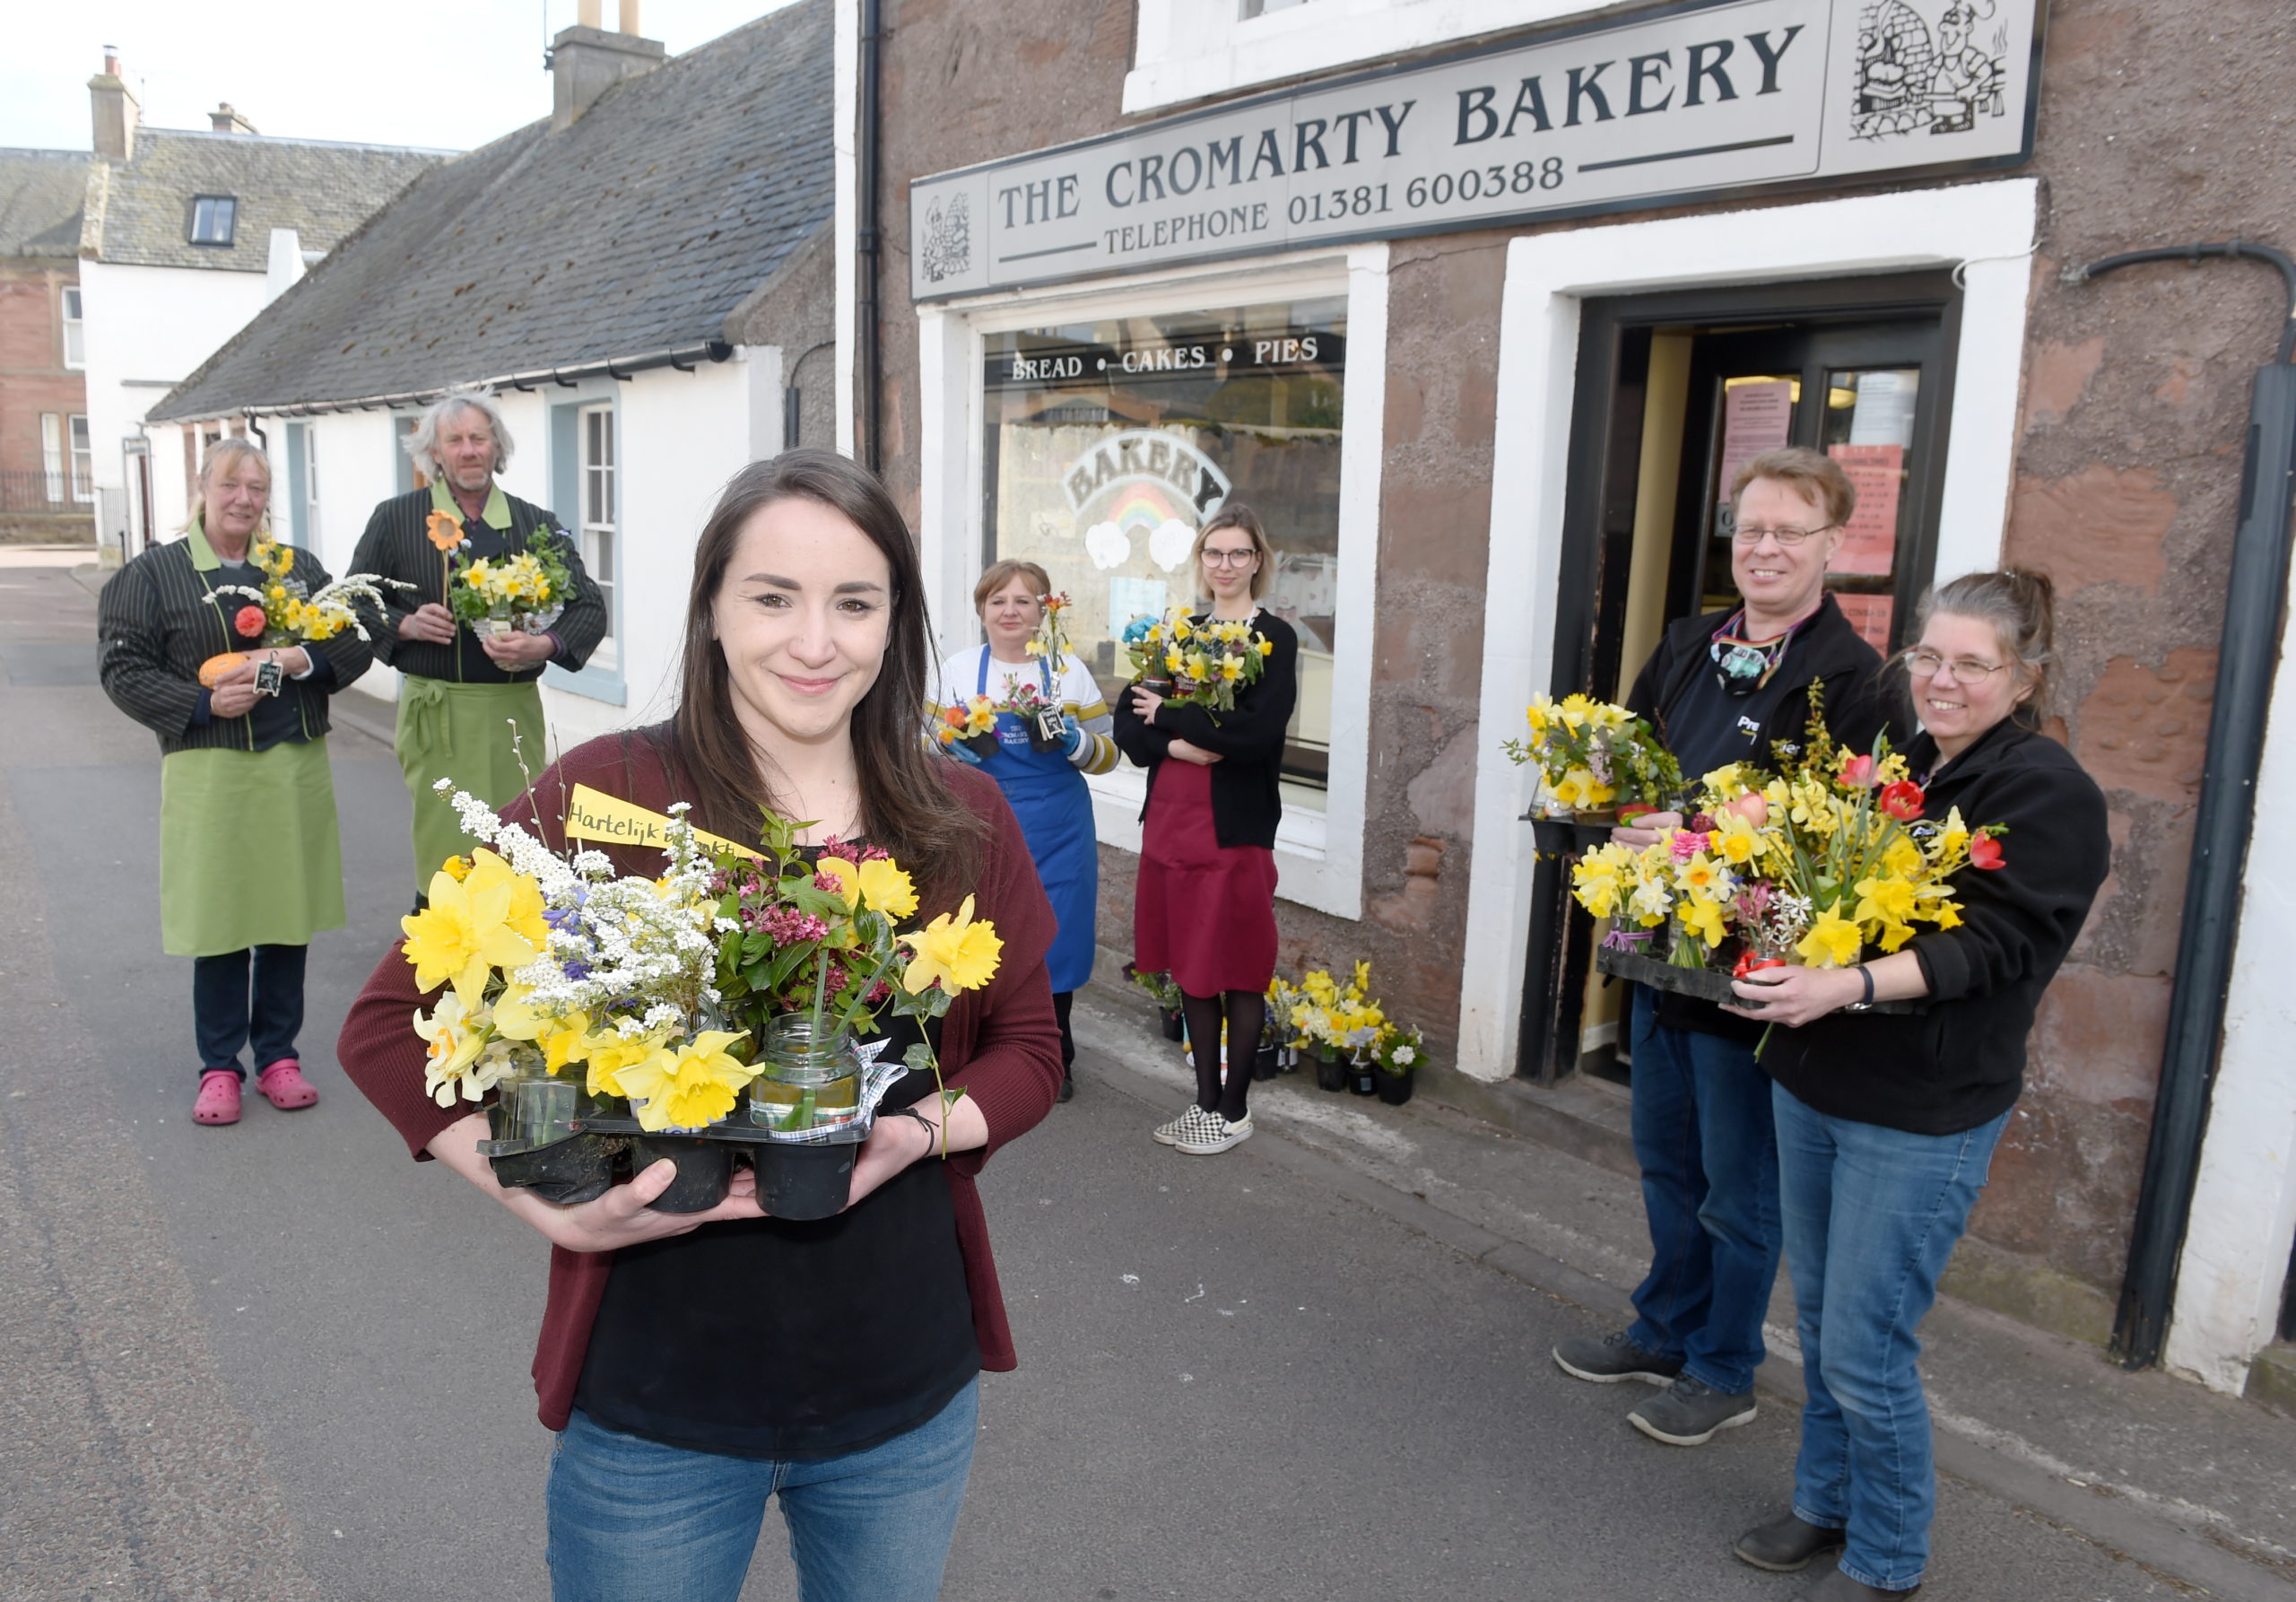 The owners of Cromarty Stores, The Cheese House and the Bakery were recipients of flowers and thanks from the community on Sunday night.
Picture by Sandy McCook.